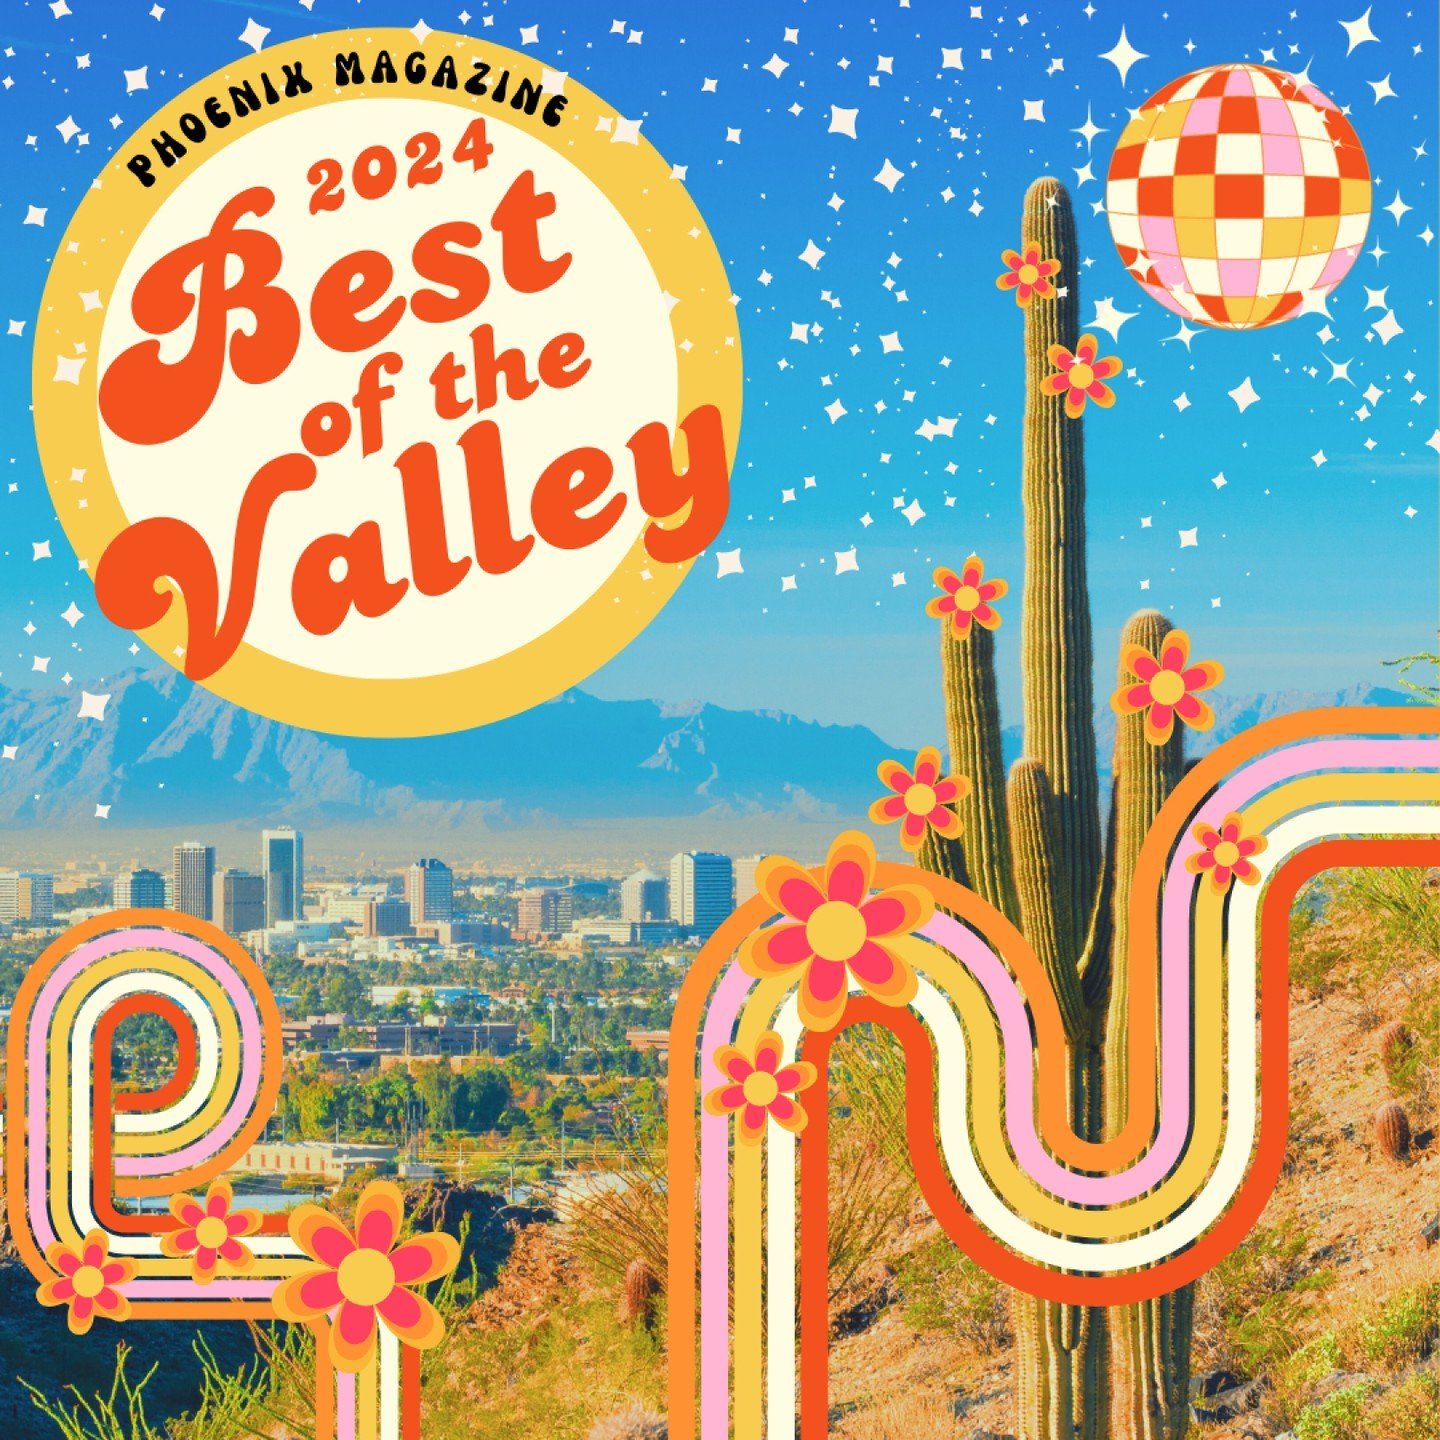 🌟 We are SO EXCITED! 🌟

Swoon Salon has been selected as a Top 10 finalist in the Best of the Valley 2024 awards! This amazing recognition comes from the incredible support of our clients&mdash;thank you all for nominating us and making this possib